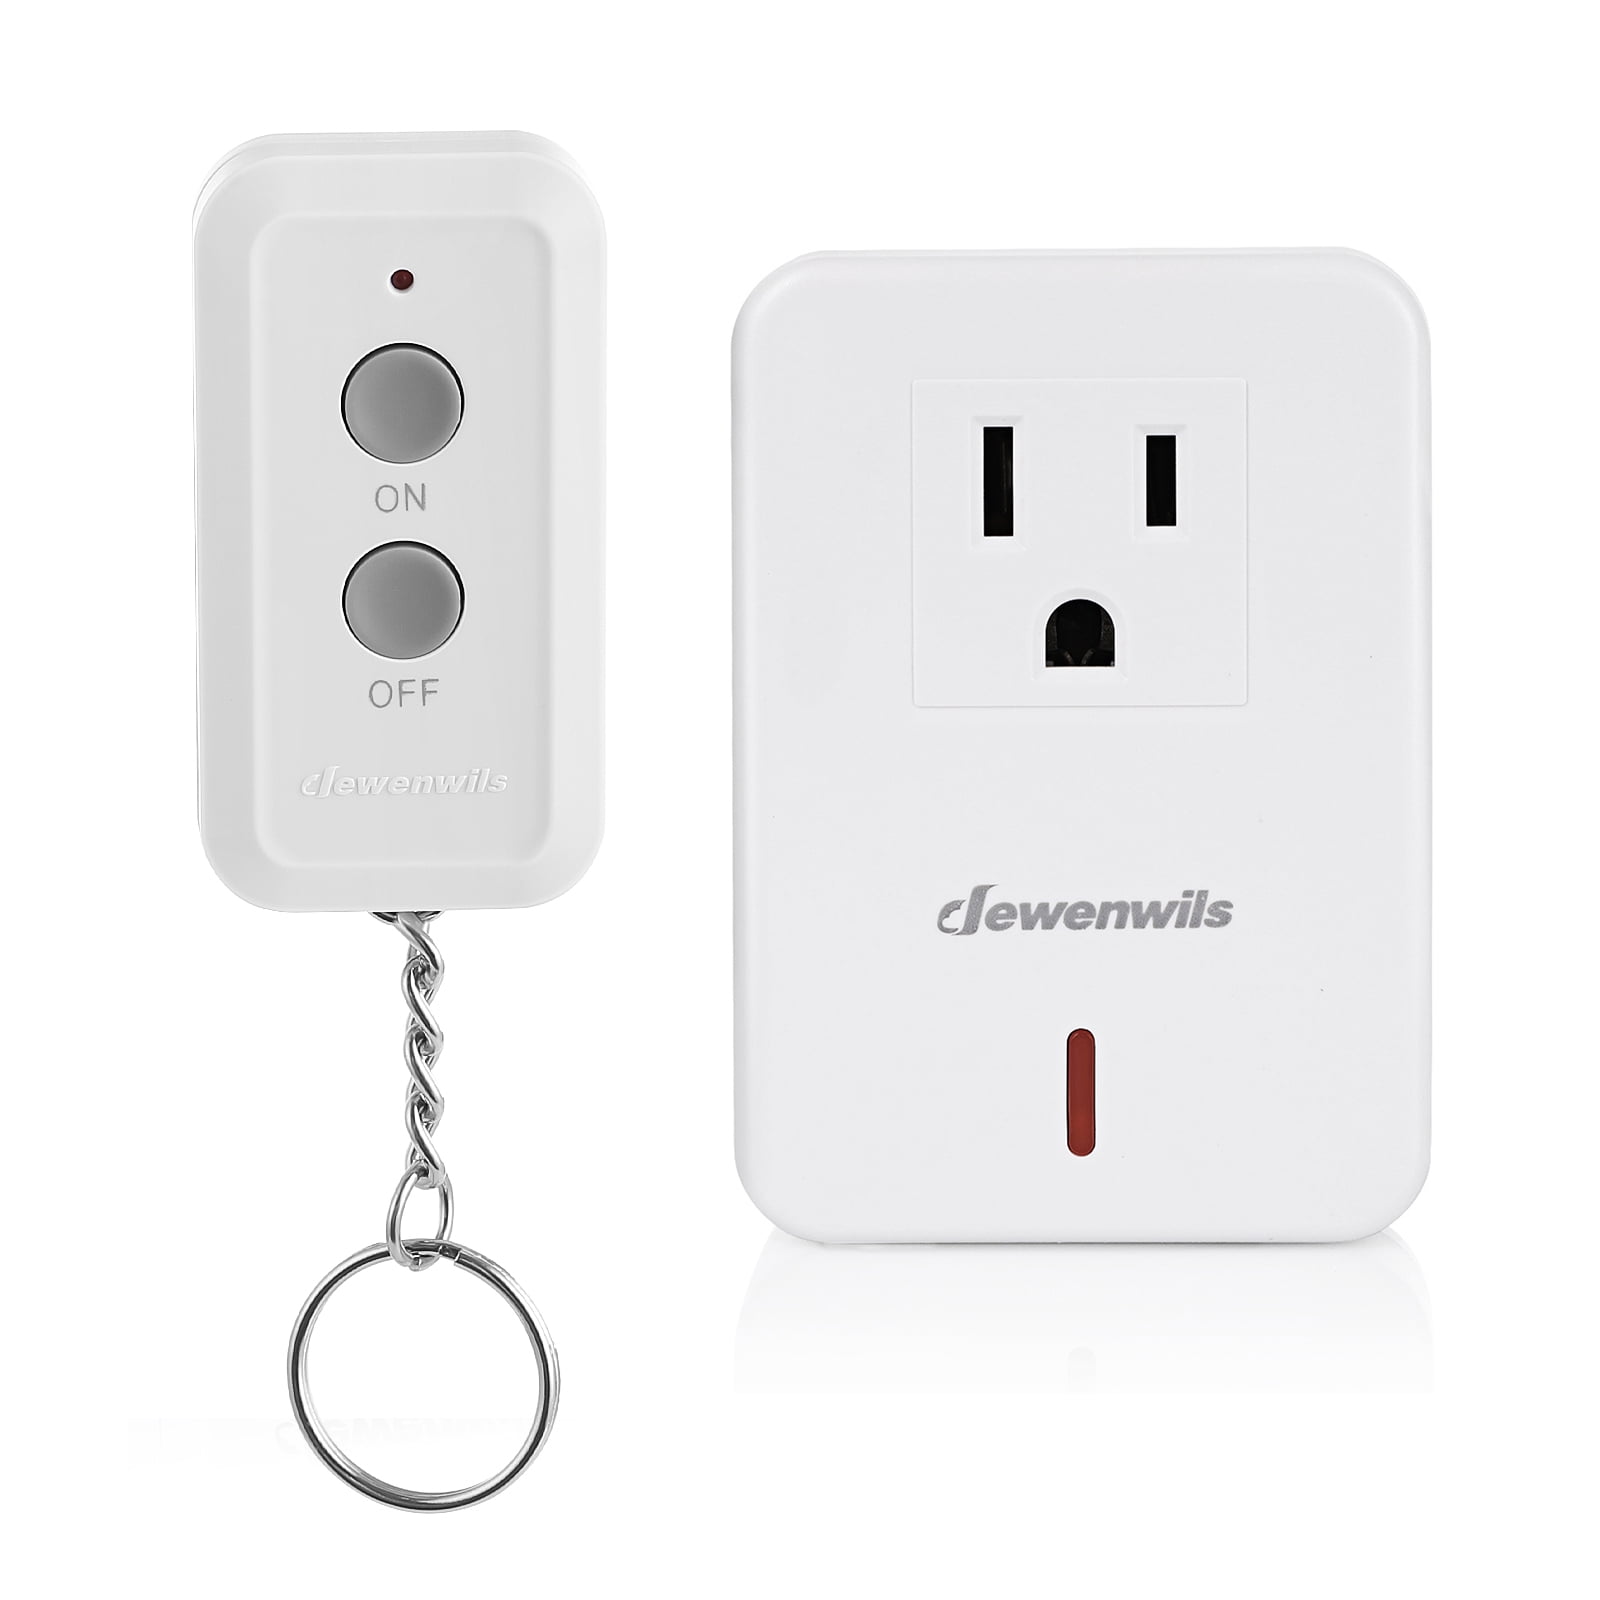 Eityilla dewenwils remote control electrical outlet wireless on off